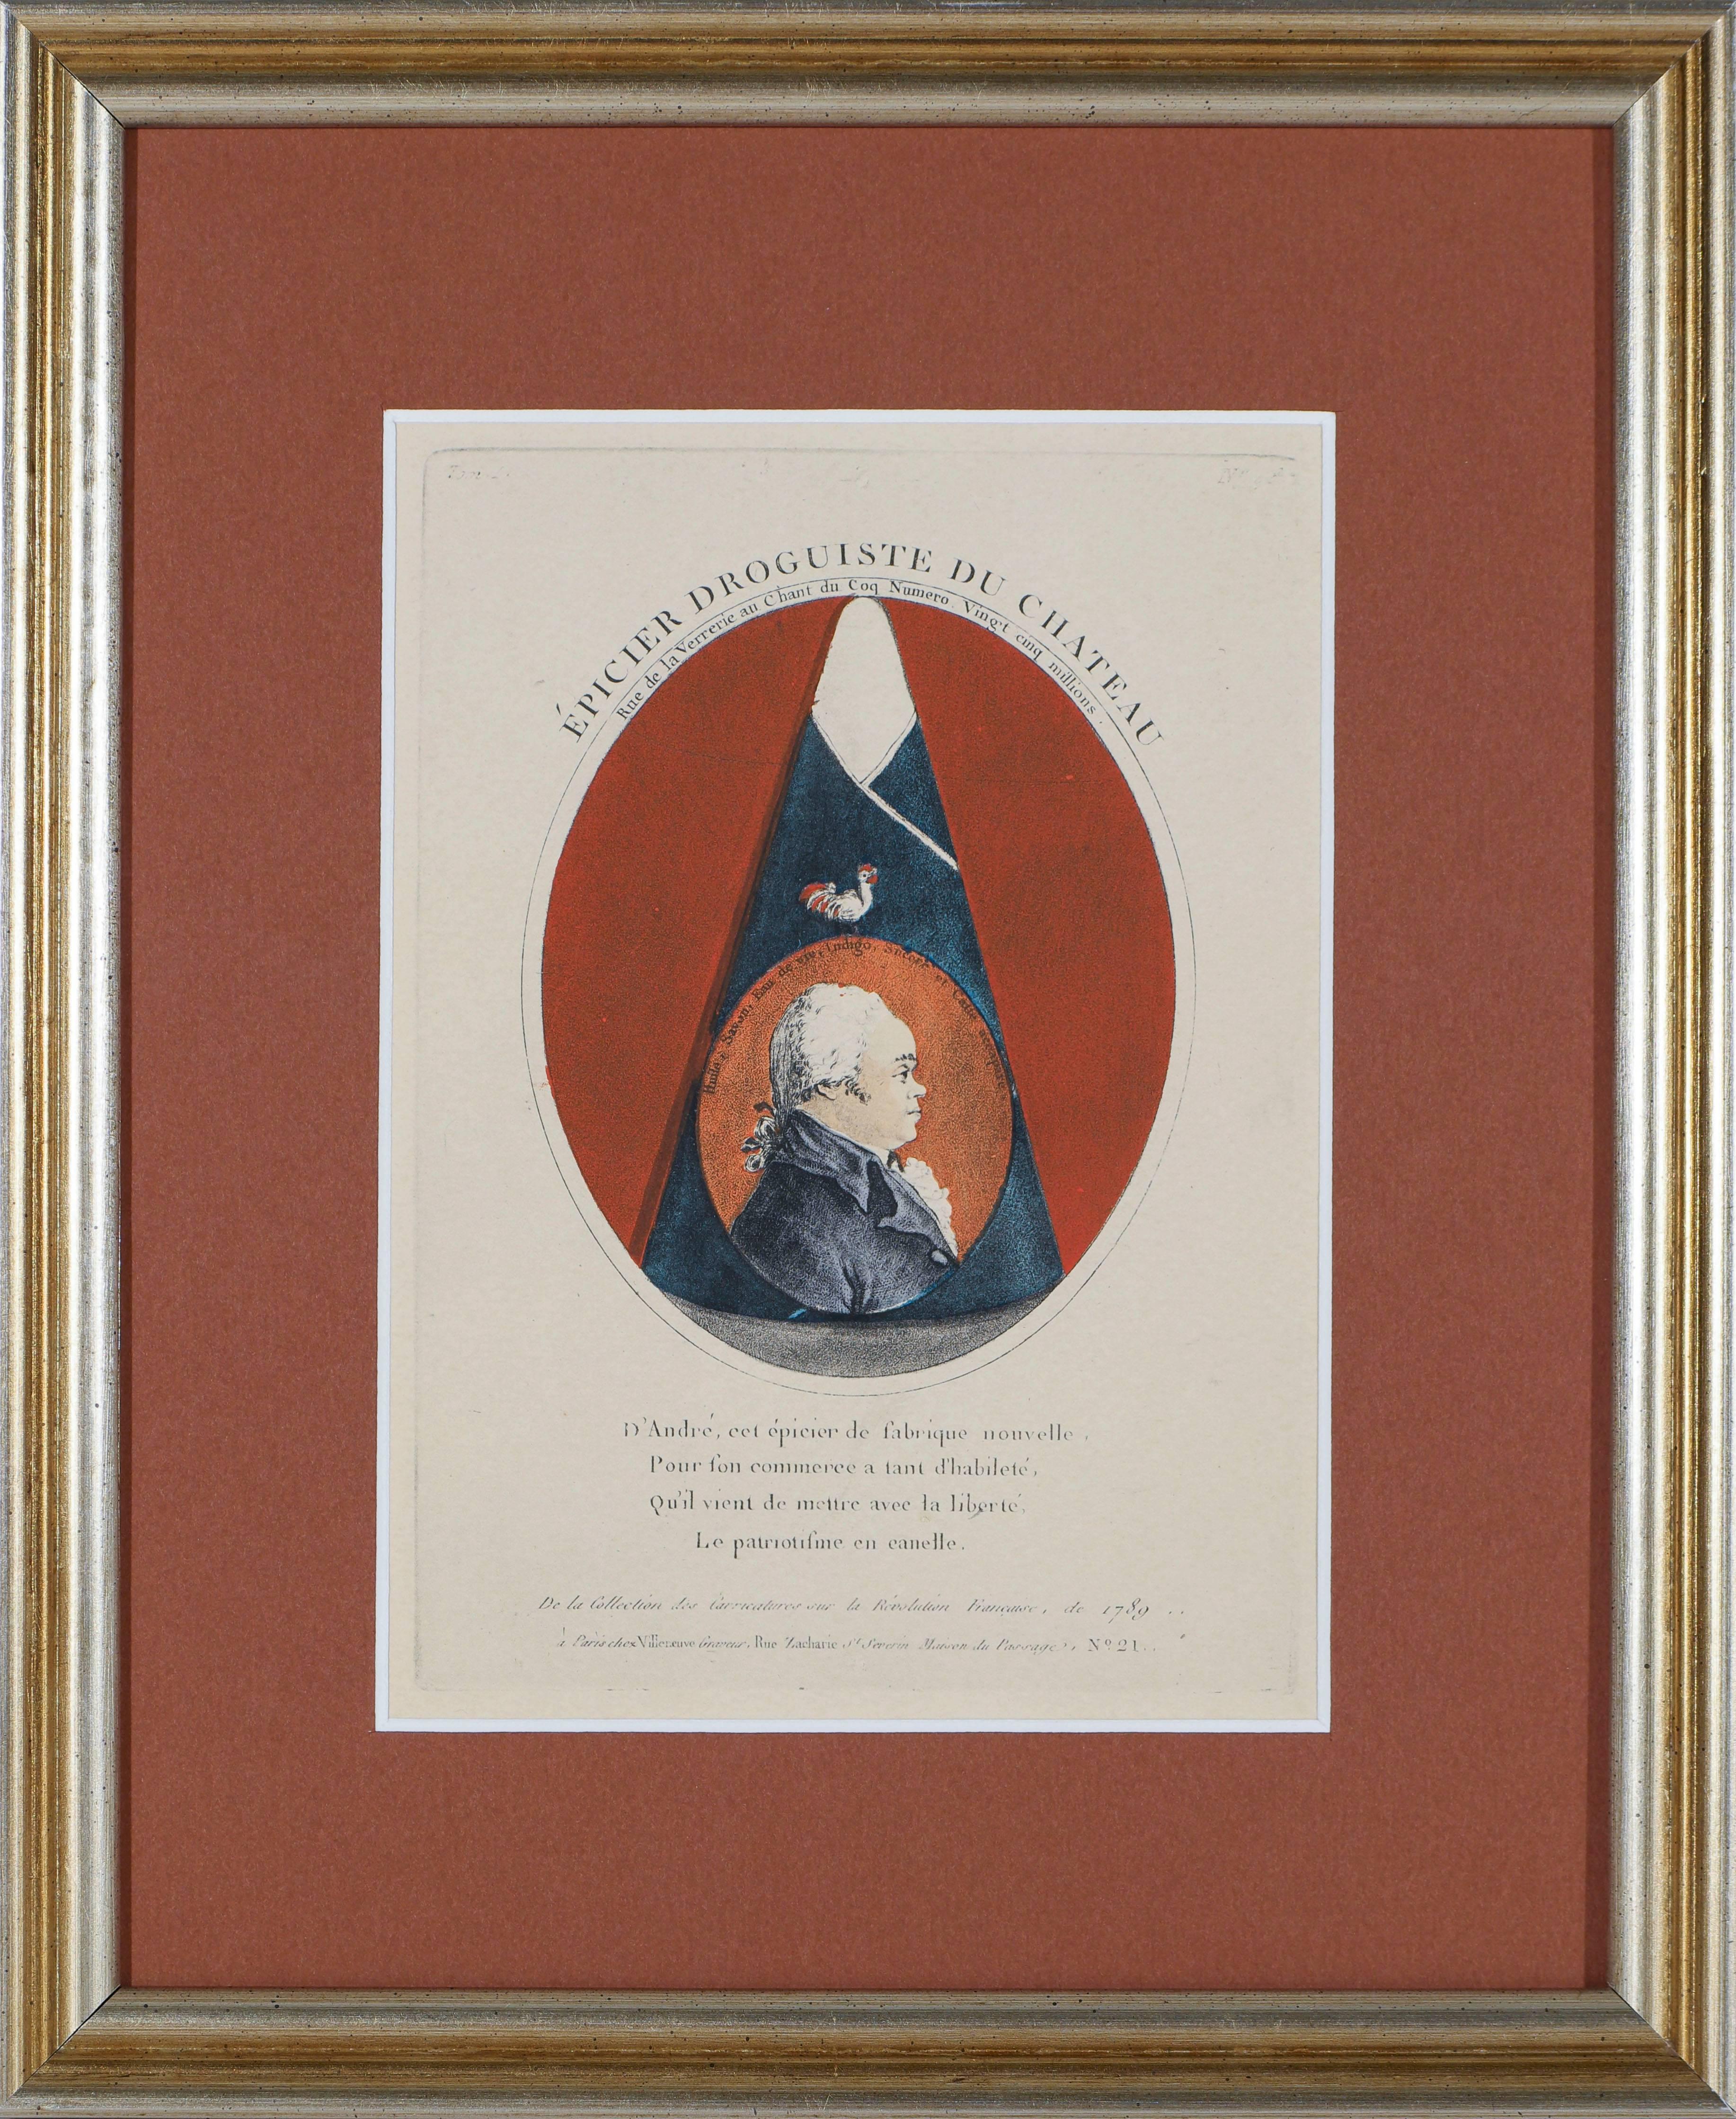 Unknown Portrait Print - The Most Celebrated French Grocer of the Chateau